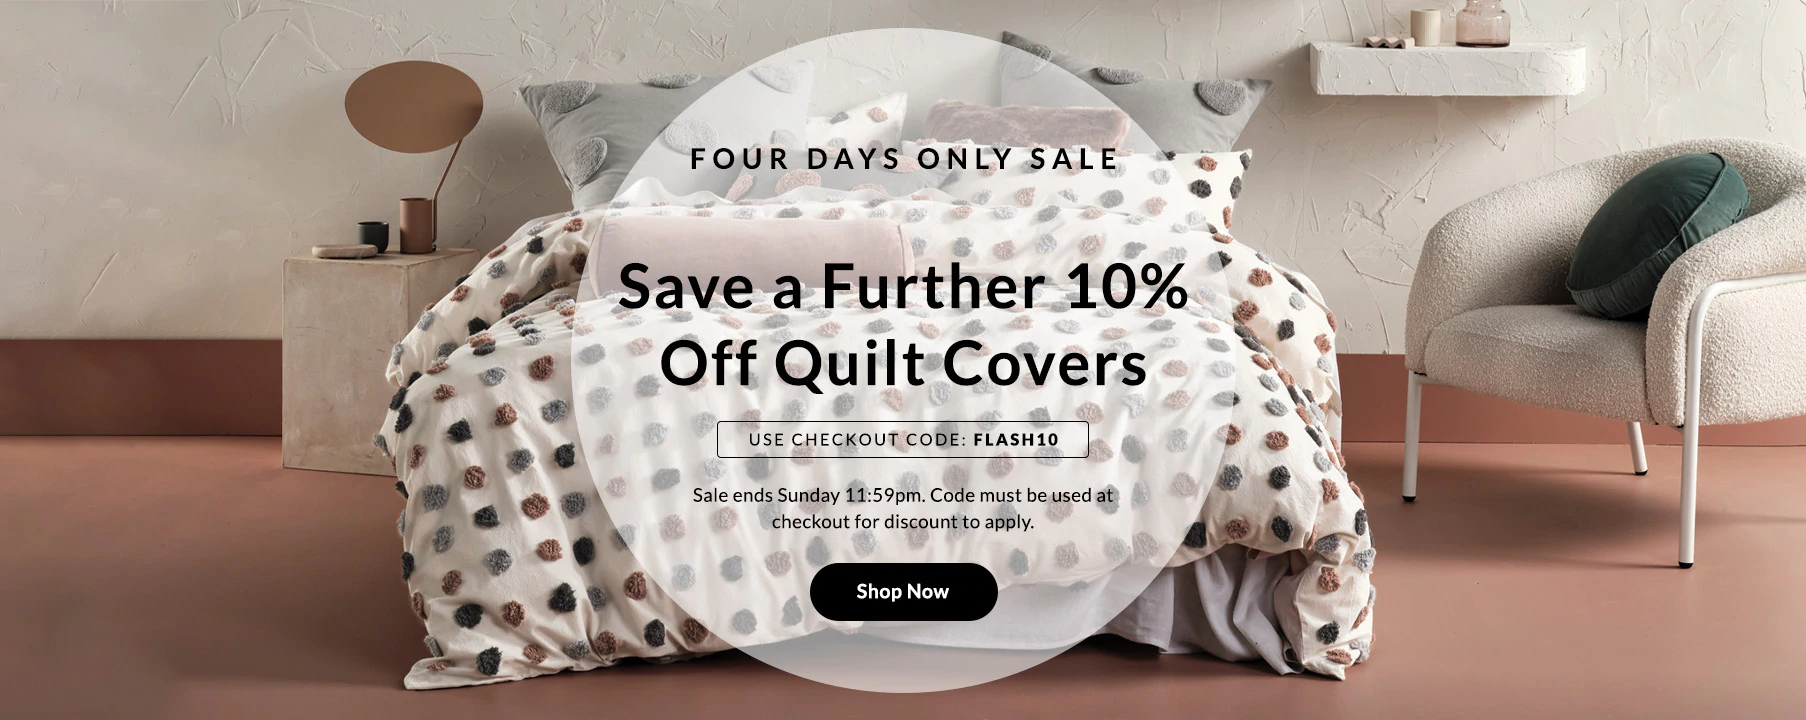 Take a further 10% OFF on quilt covers with this Manchester Warehouse promo code